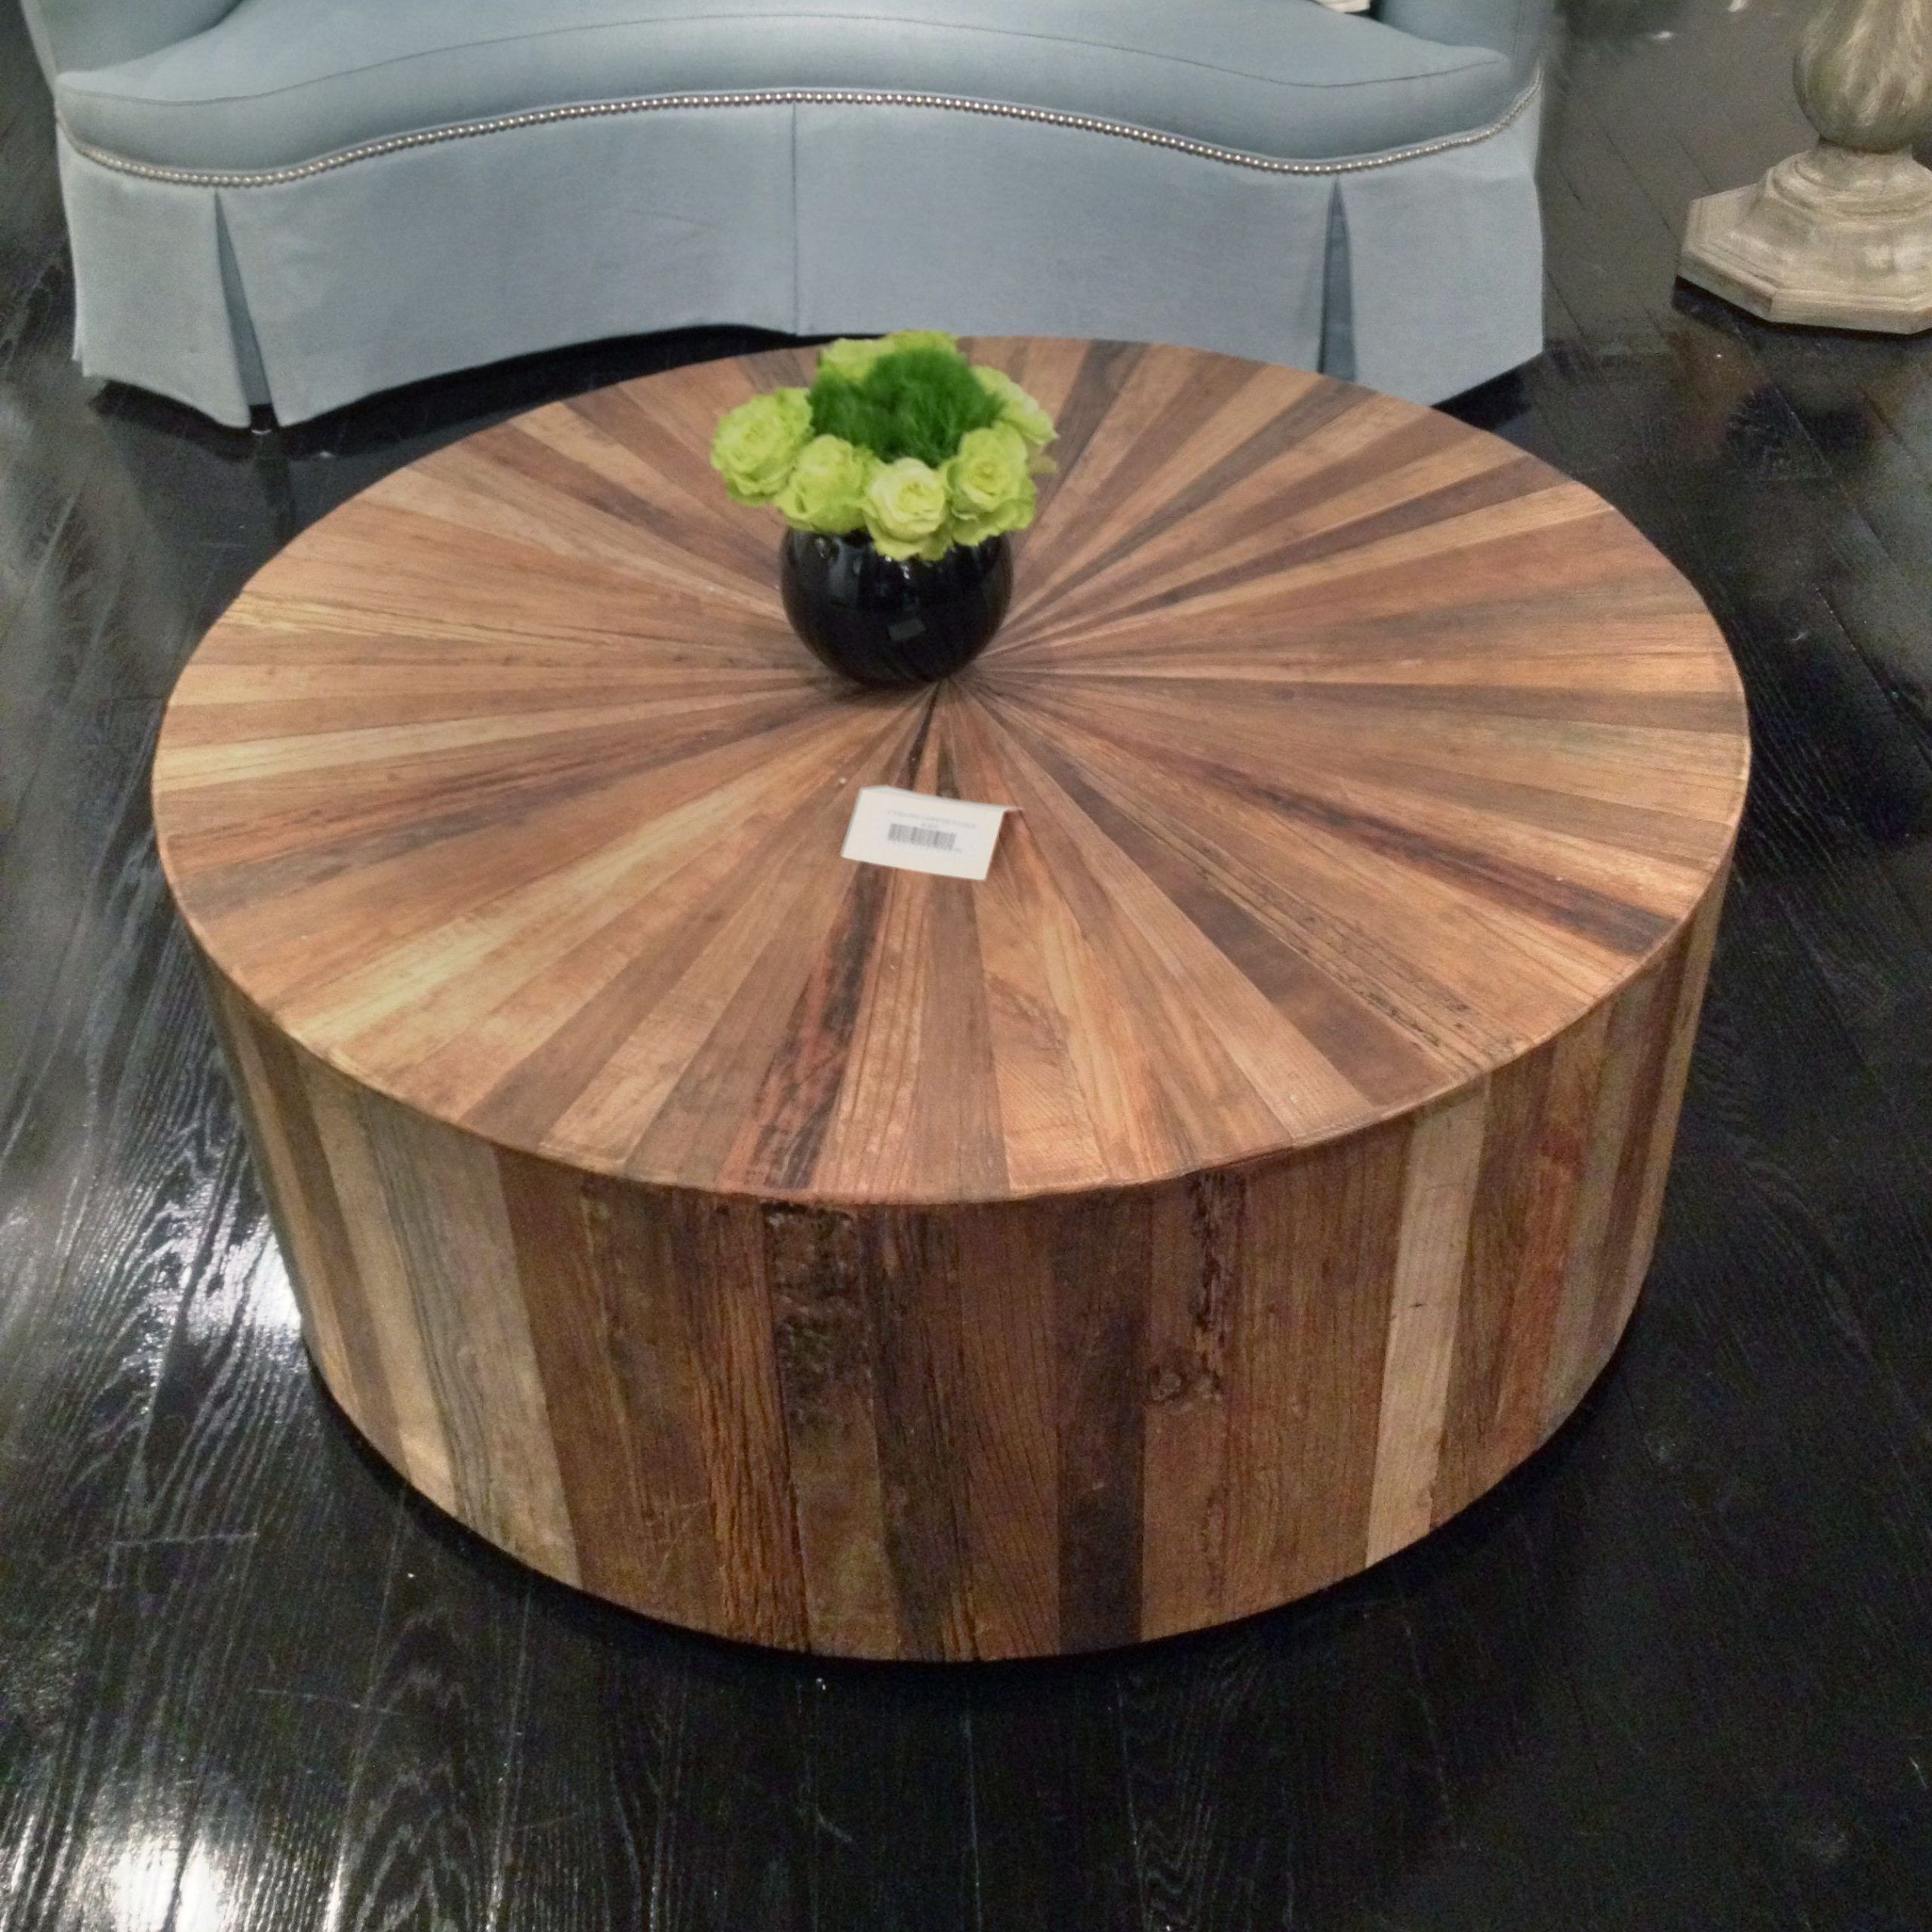 Round Wood Coffee Tables With Storage : Yj Round Storage Coffee Table Regarding Round Coffee Tables (View 9 of 15)